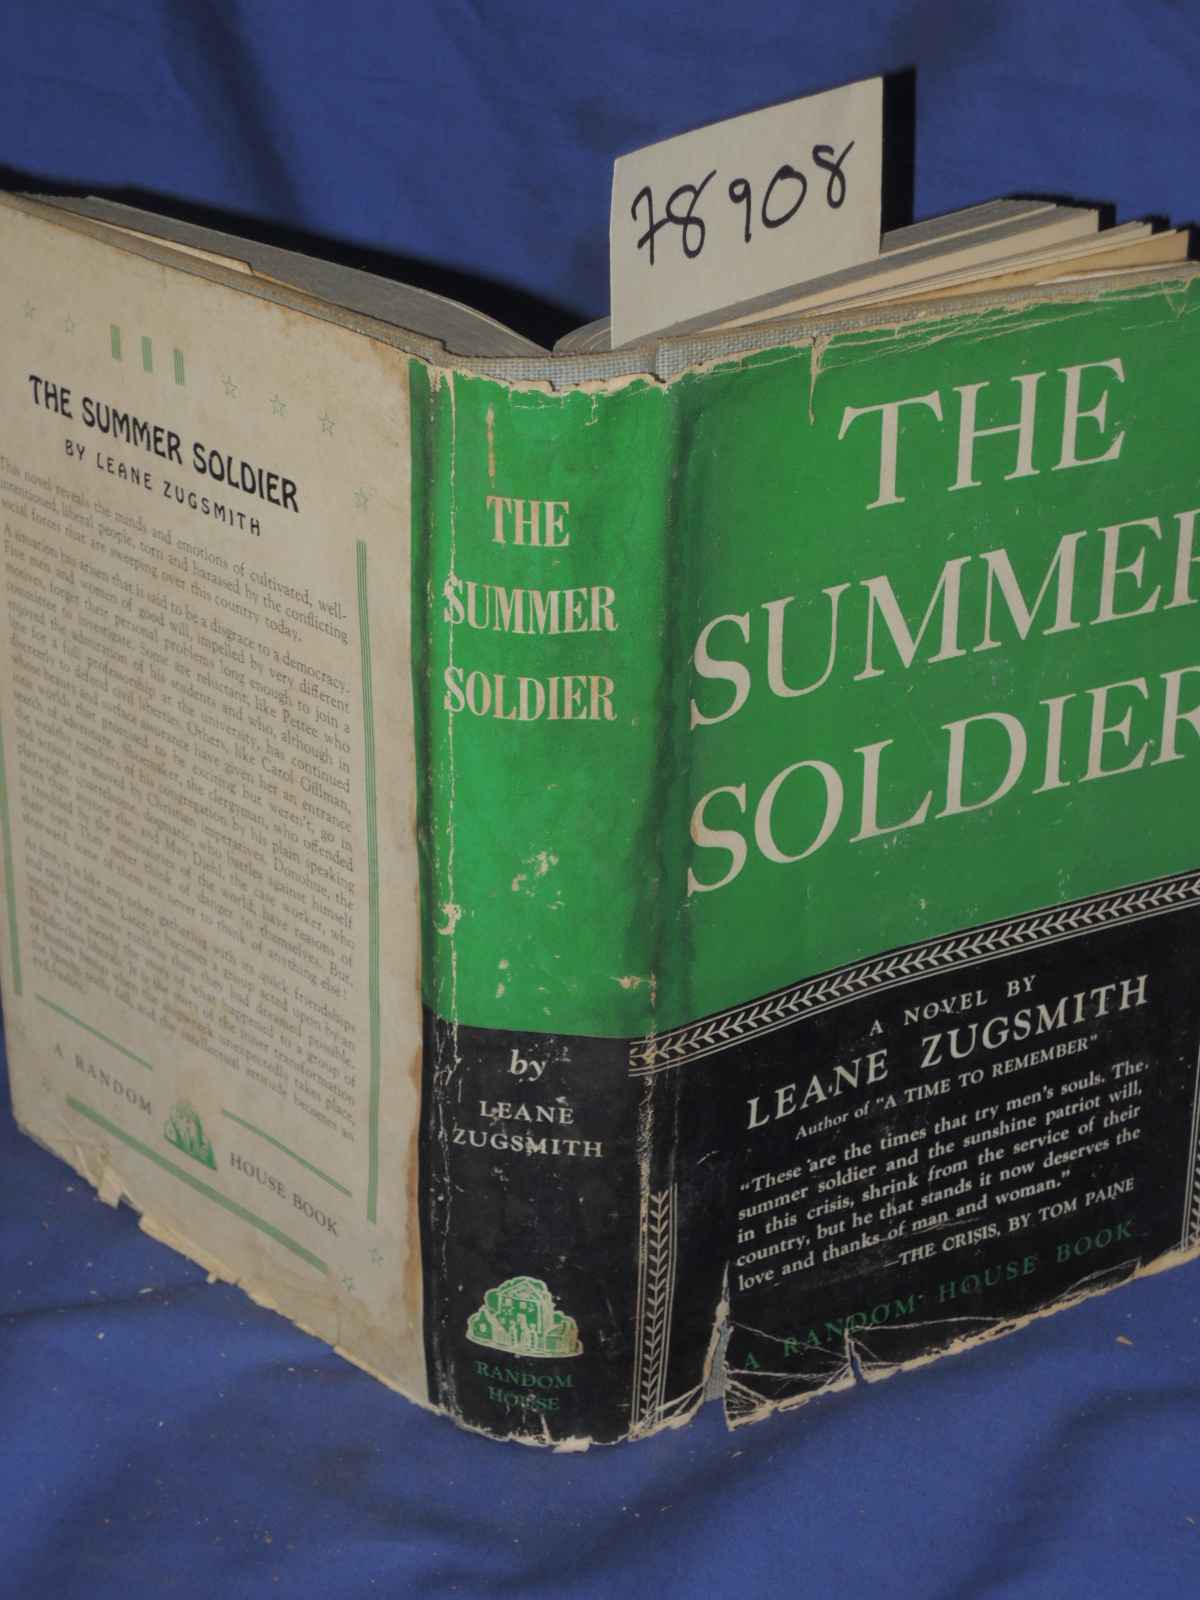 Zugsmith, Leane: THE SUMMER SOLDIER